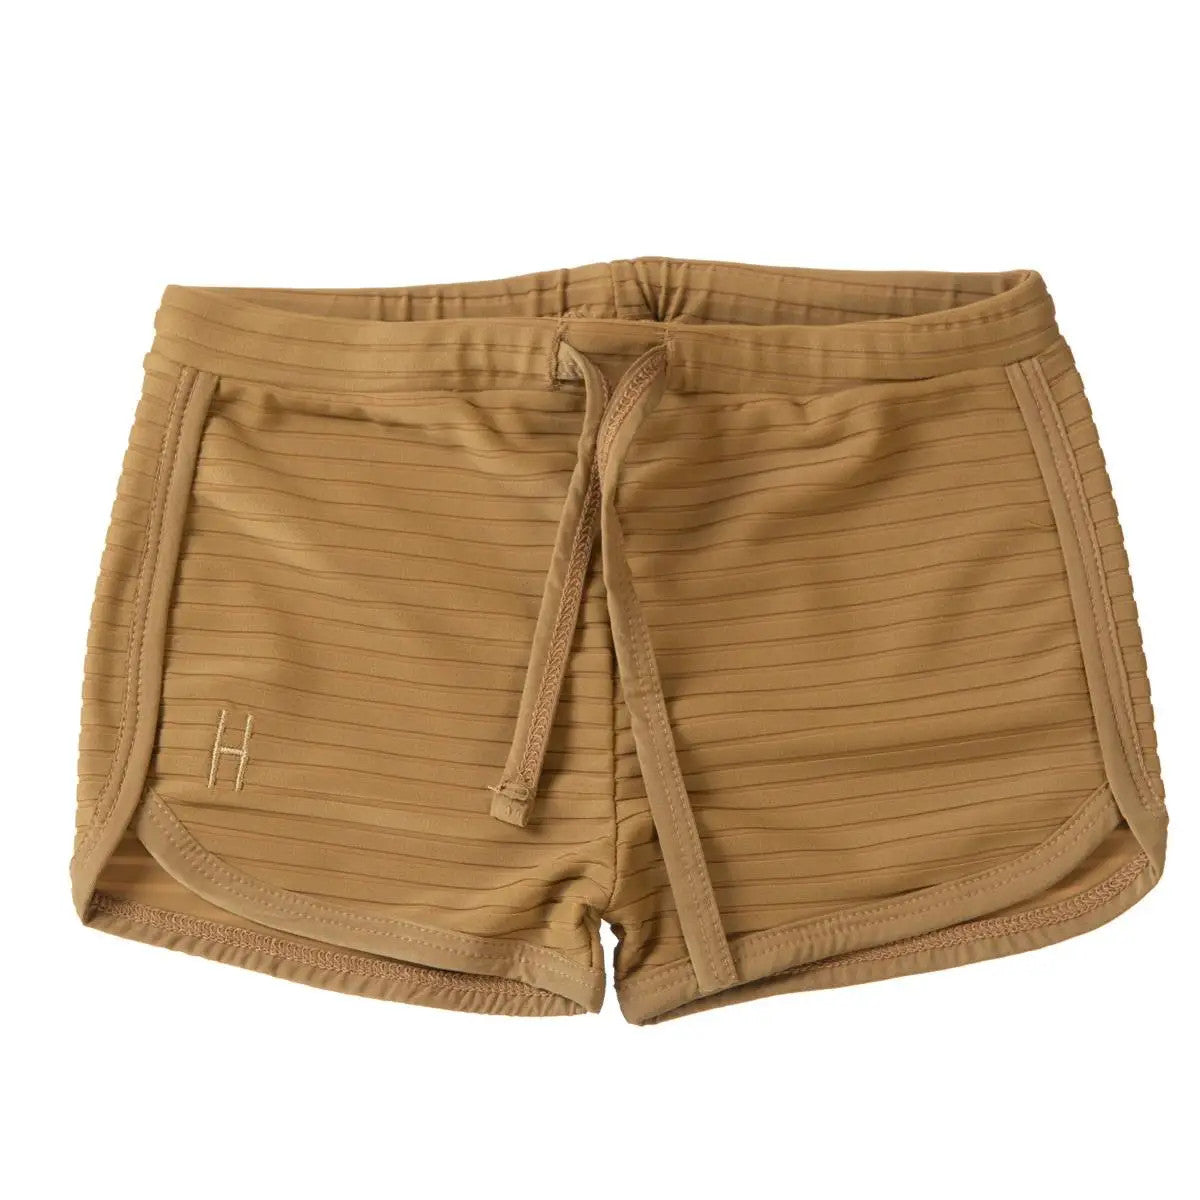 Little Hedonist unisex swim shorts made of recycled polyamide, in Antique Bronze